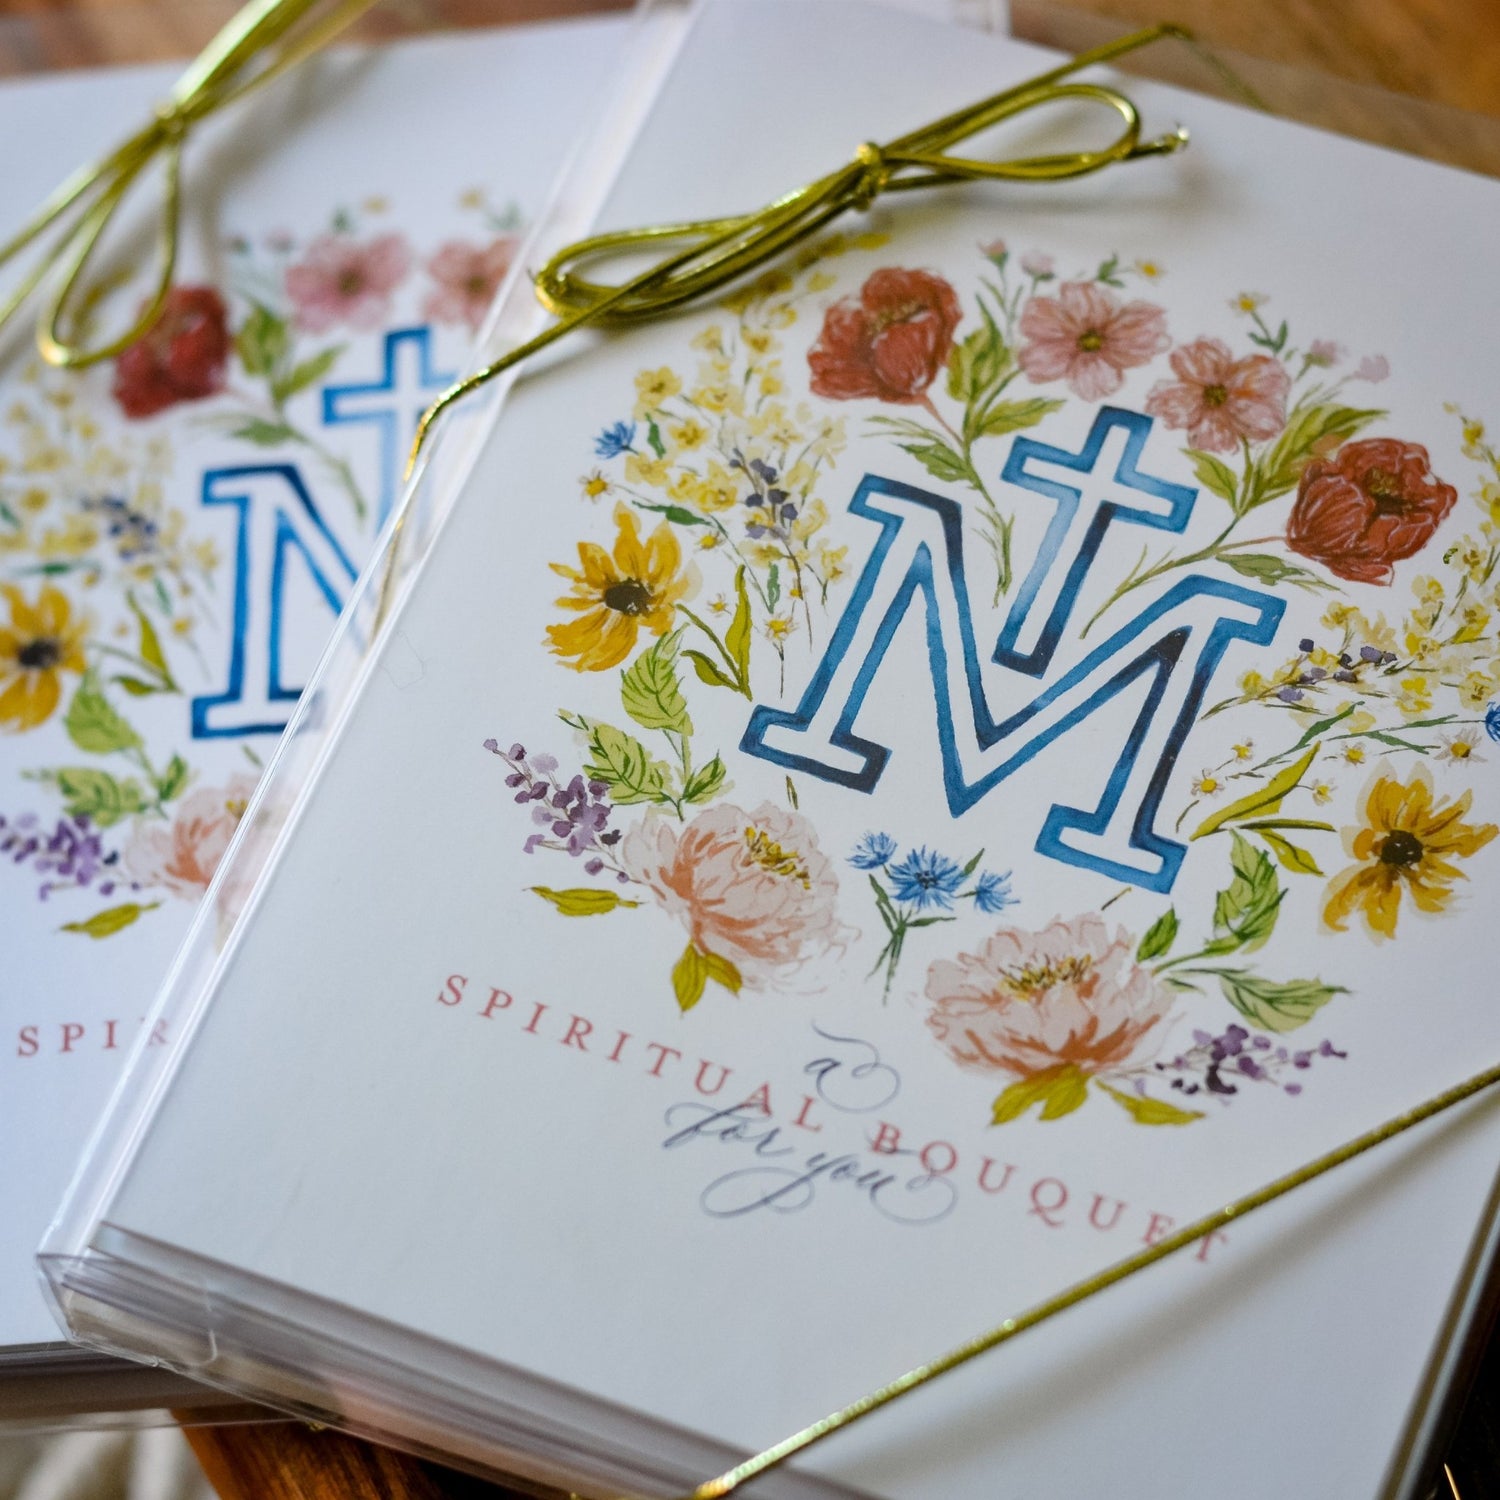 Greeting Cards - Little Way Design Co.